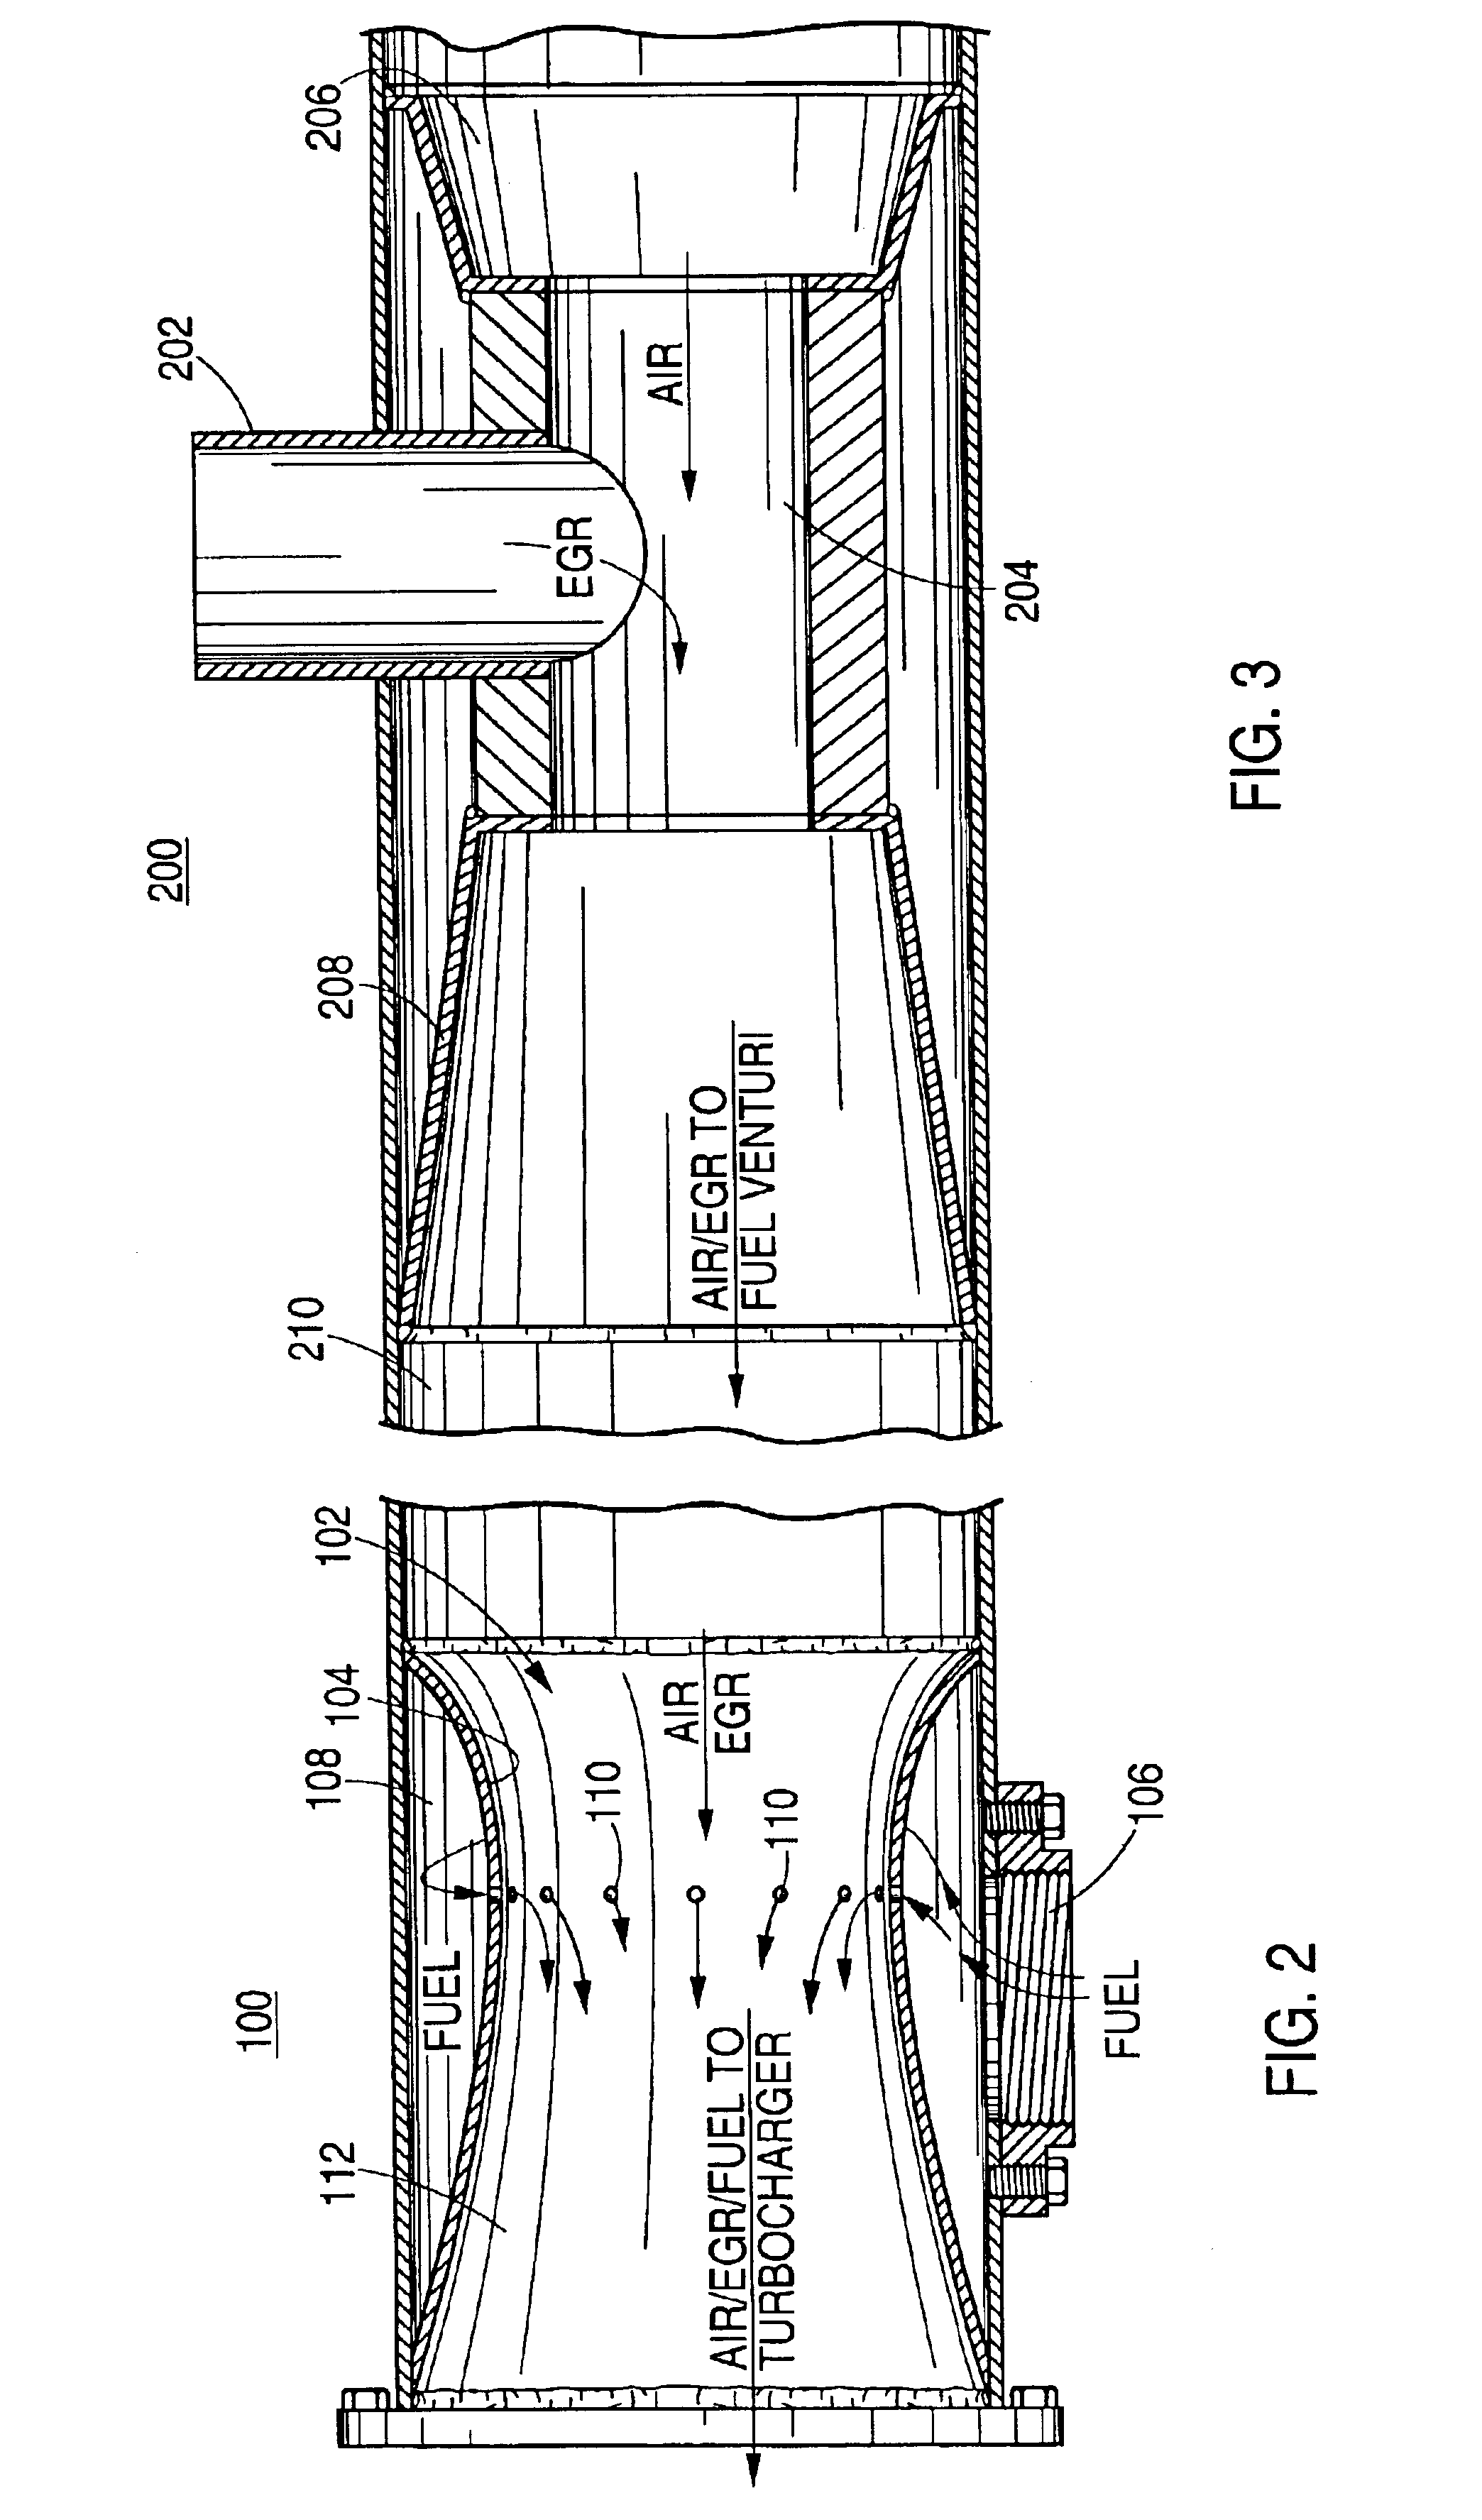 Carburetion for natural gas fueled internal combustion engine using recycled exhaust gas